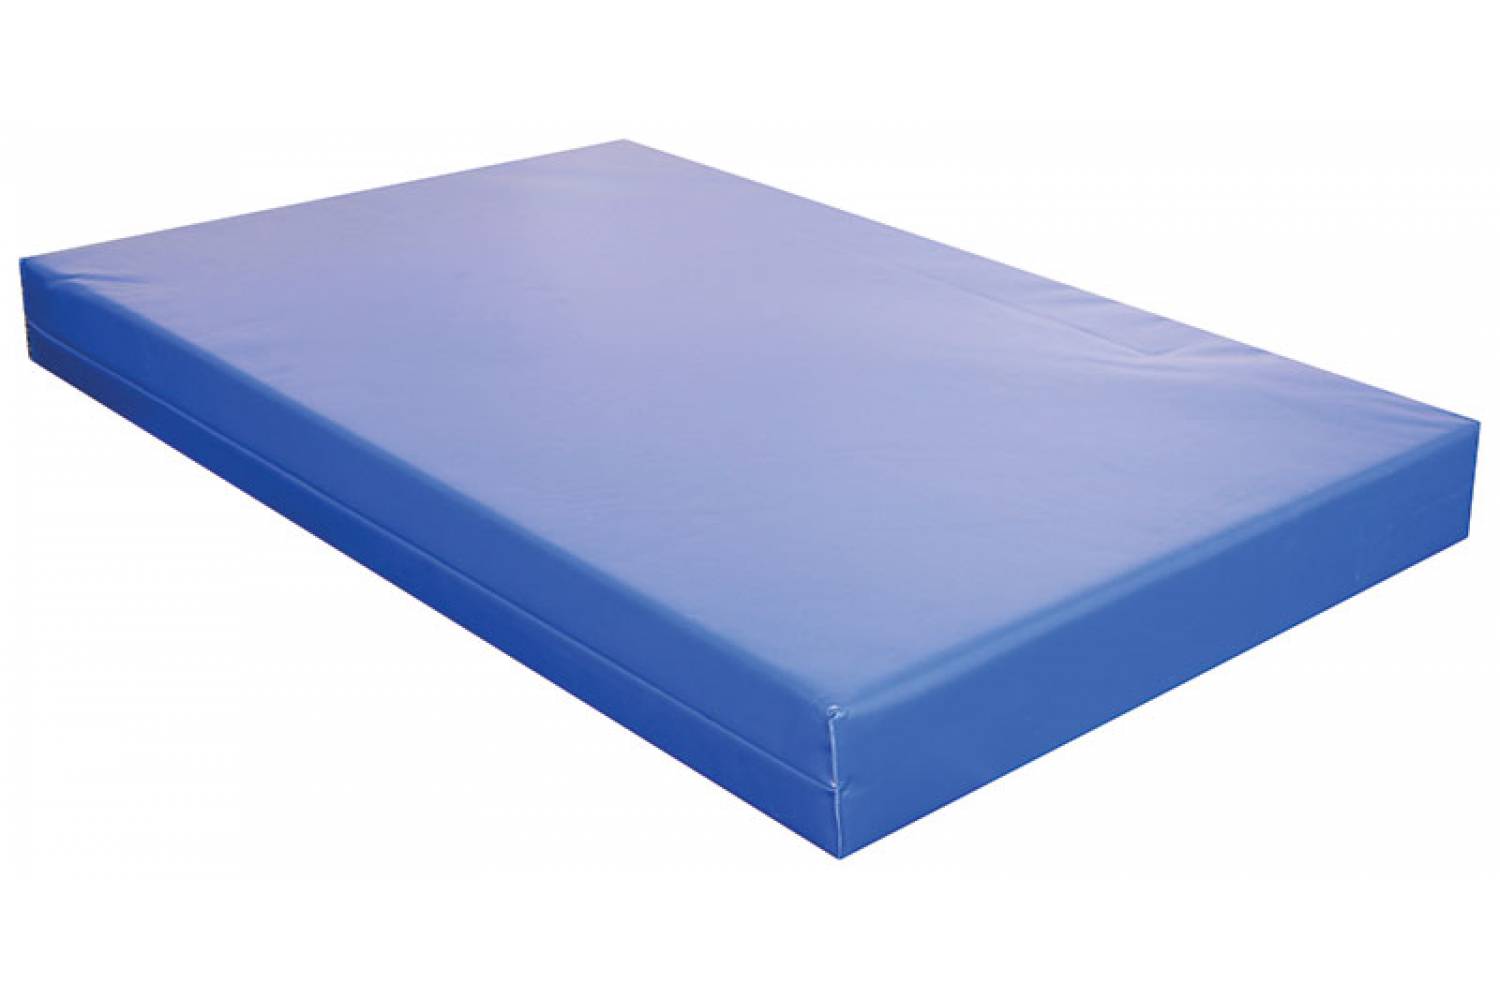 waterproof cover for cot mattress